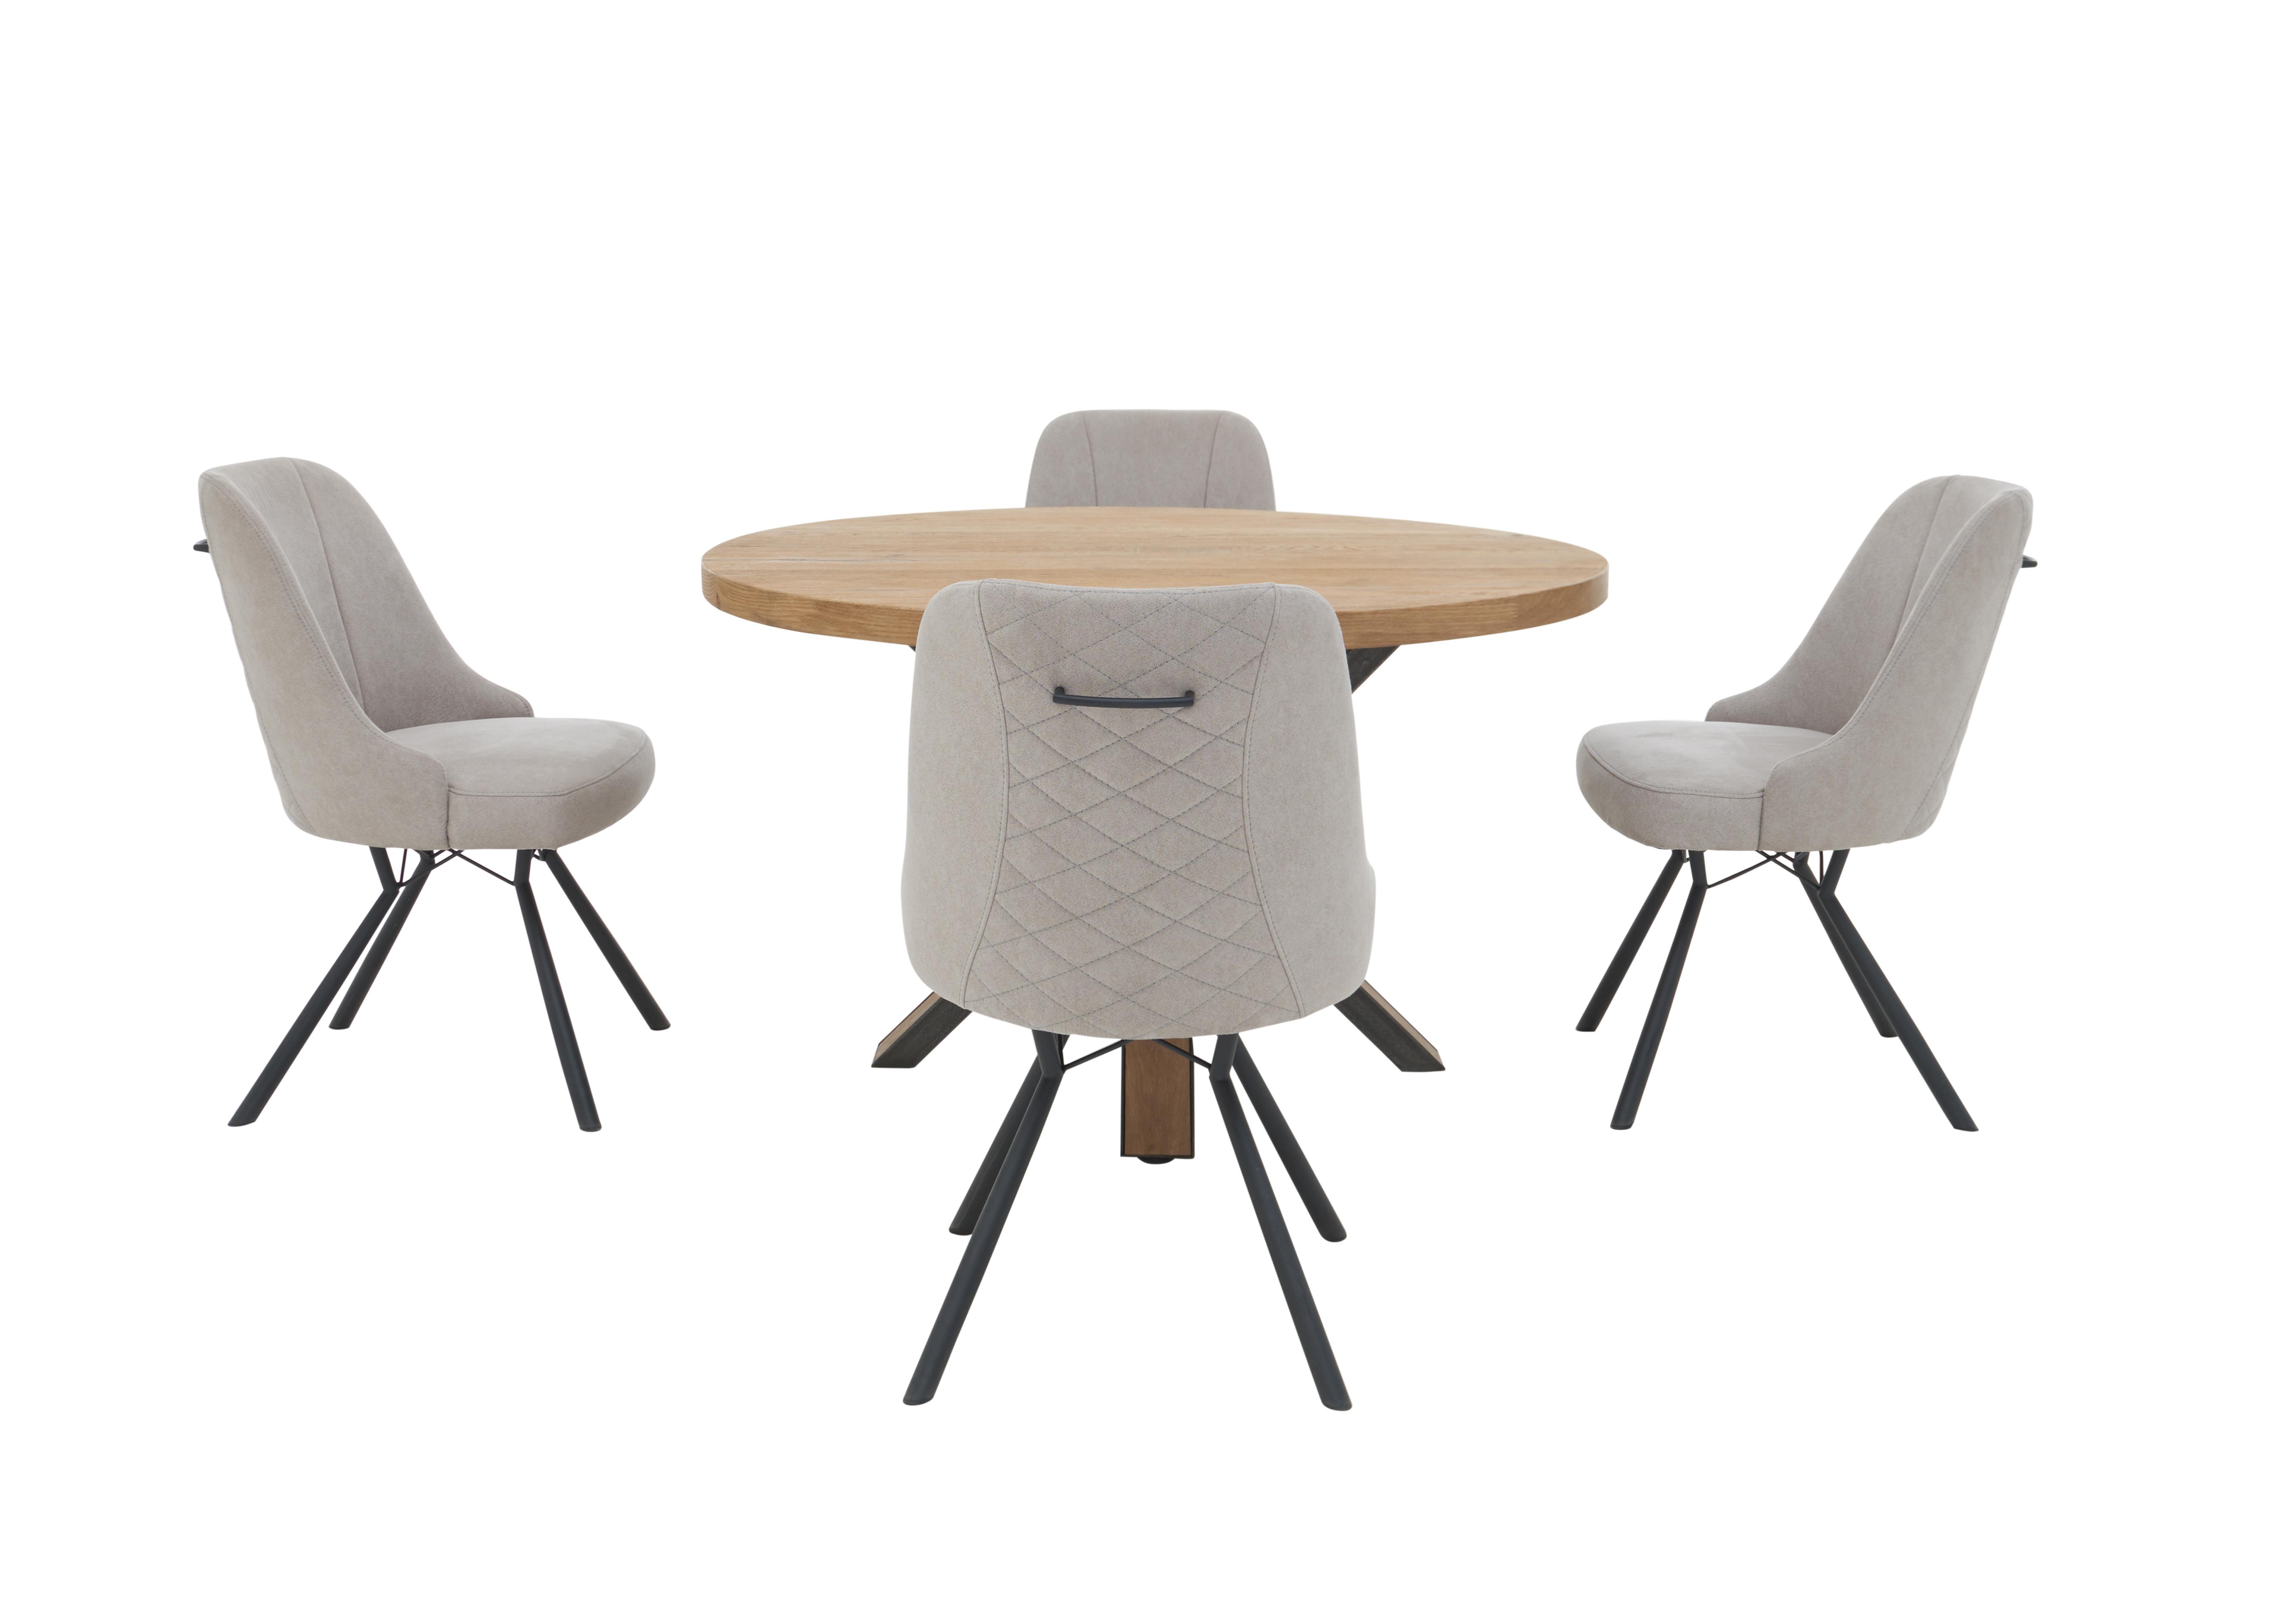 Detroit Starburst Leg Round Dining Table and 4 Detroit Dining Chairs in Light Grey on Furniture Village